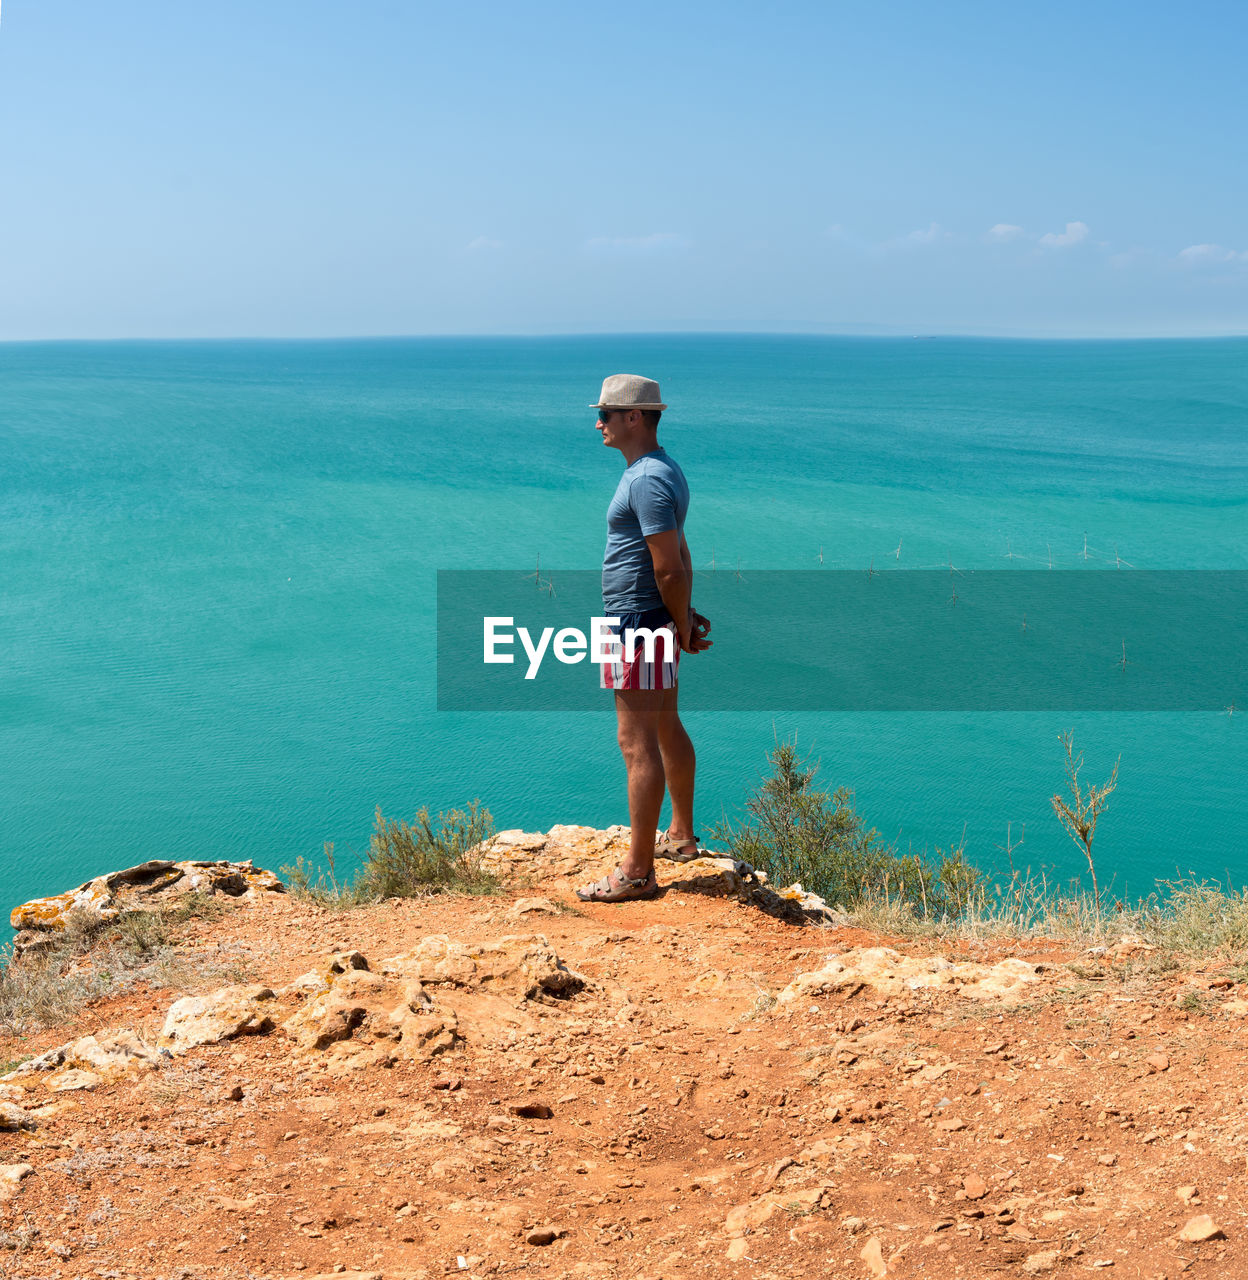 Adult man admires the panorama of the turquoise sea, summer in e